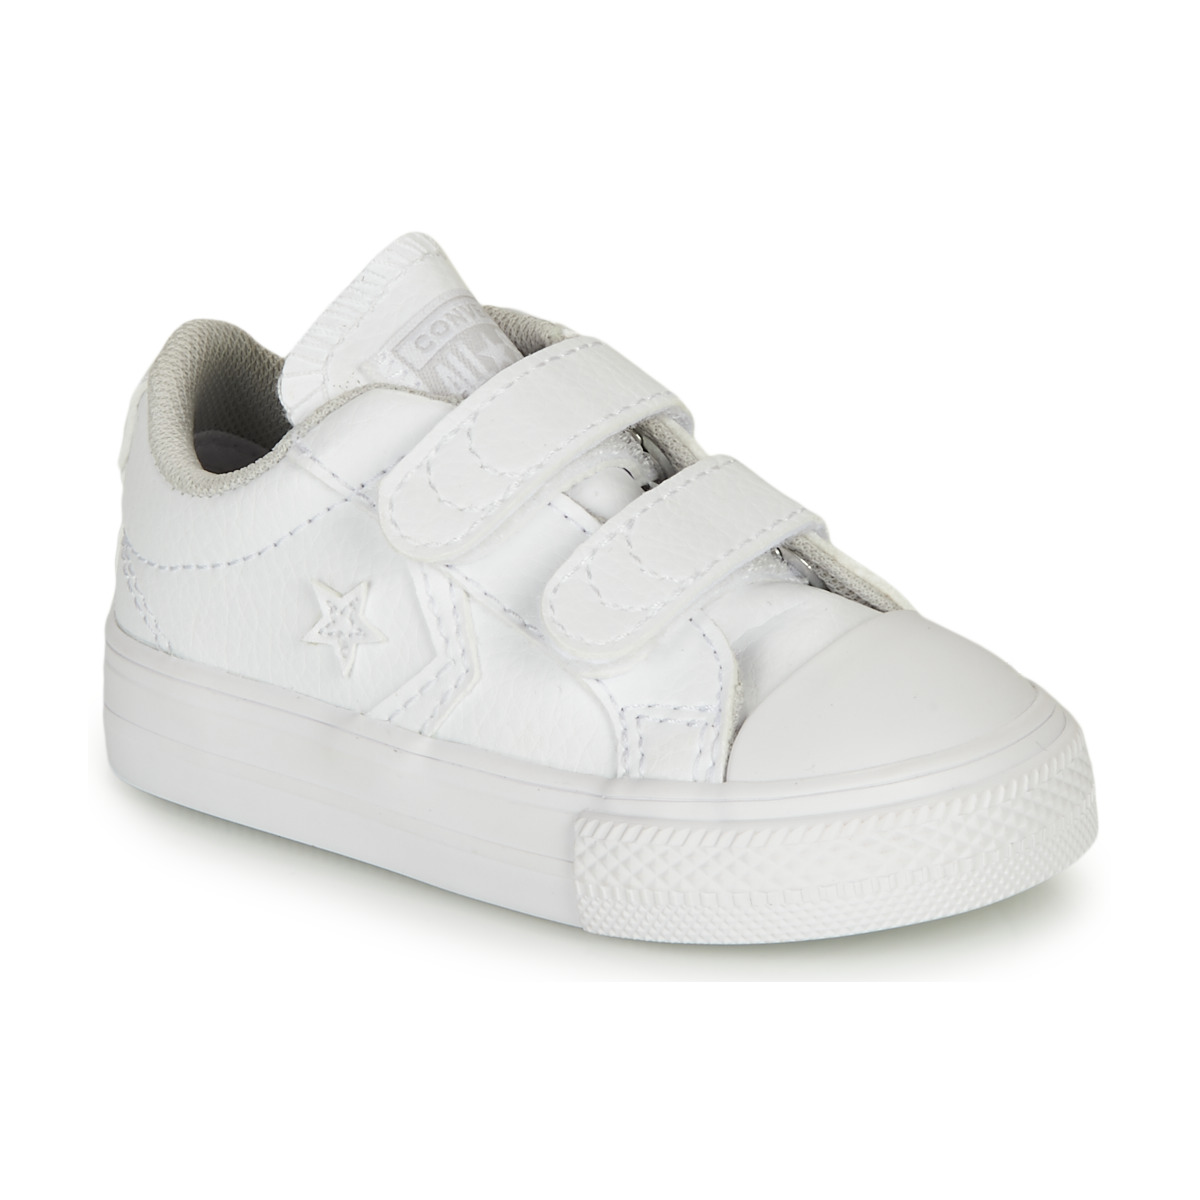 Shoes Children Low top trainers Converse STAR PLAYER OX White